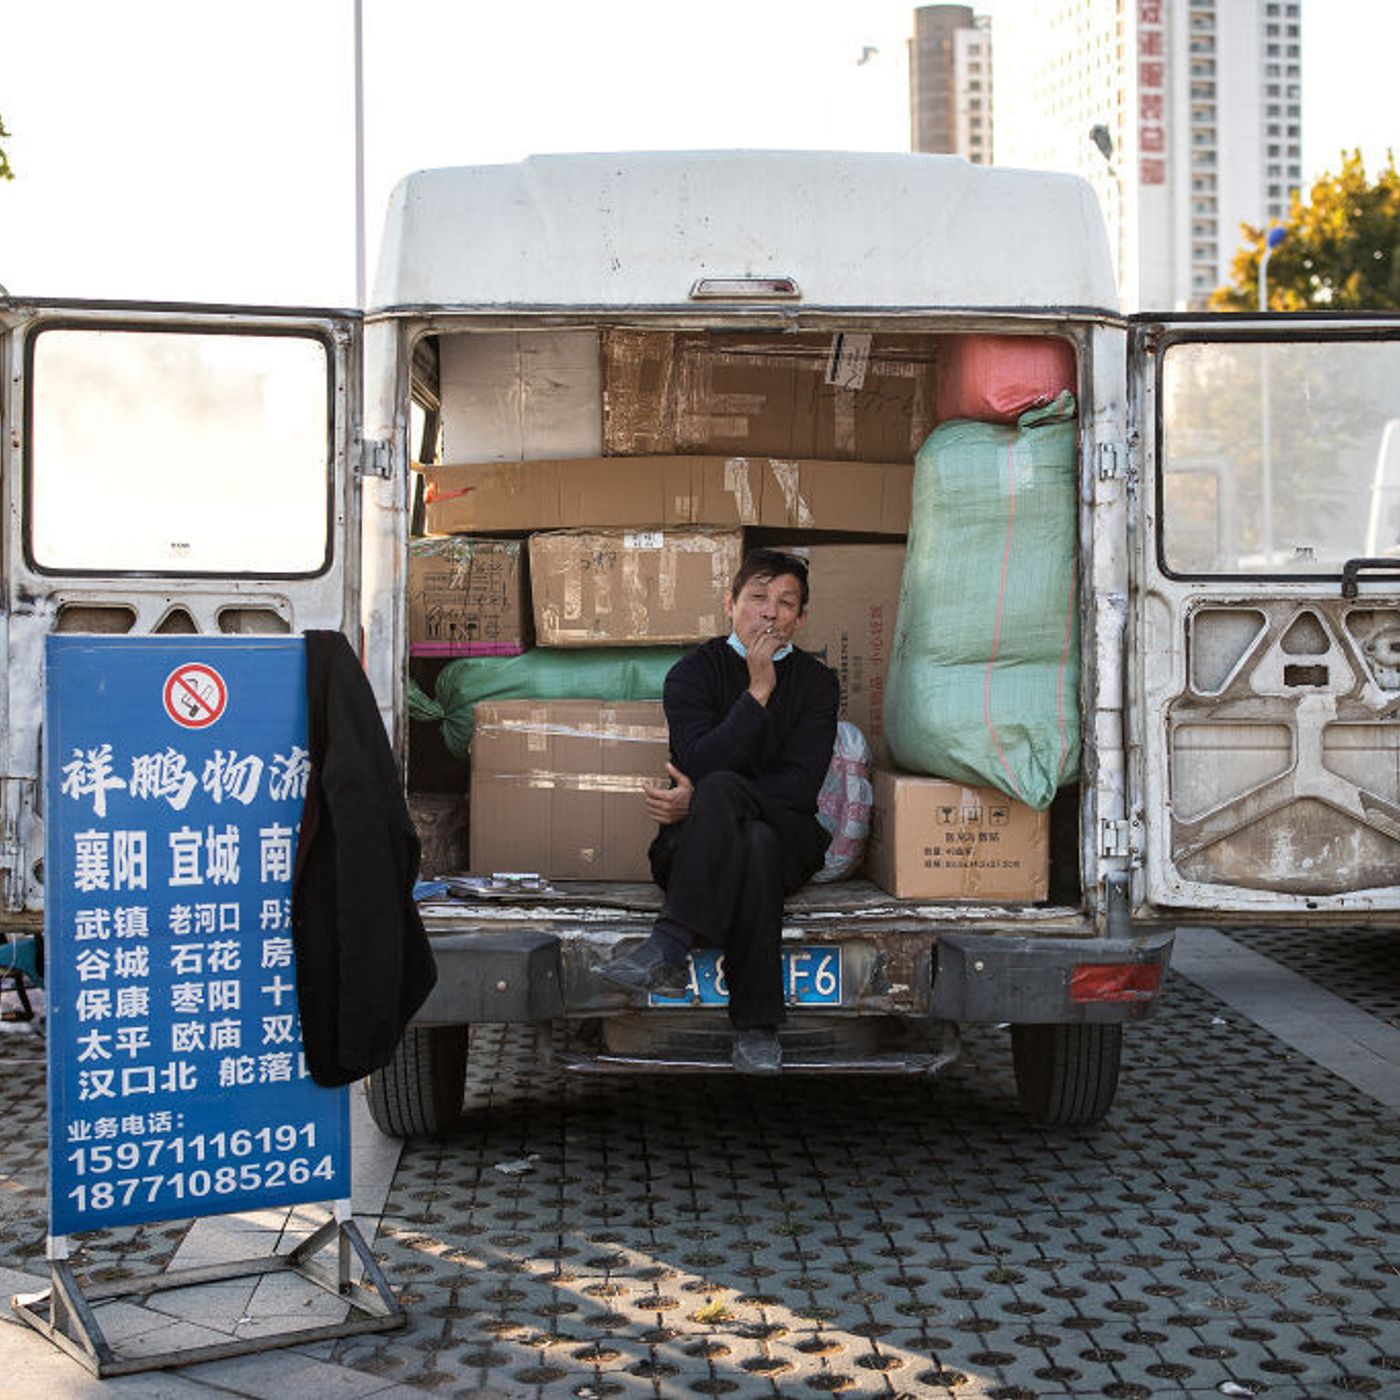 Second class citizens: the lives of China's internal migrants